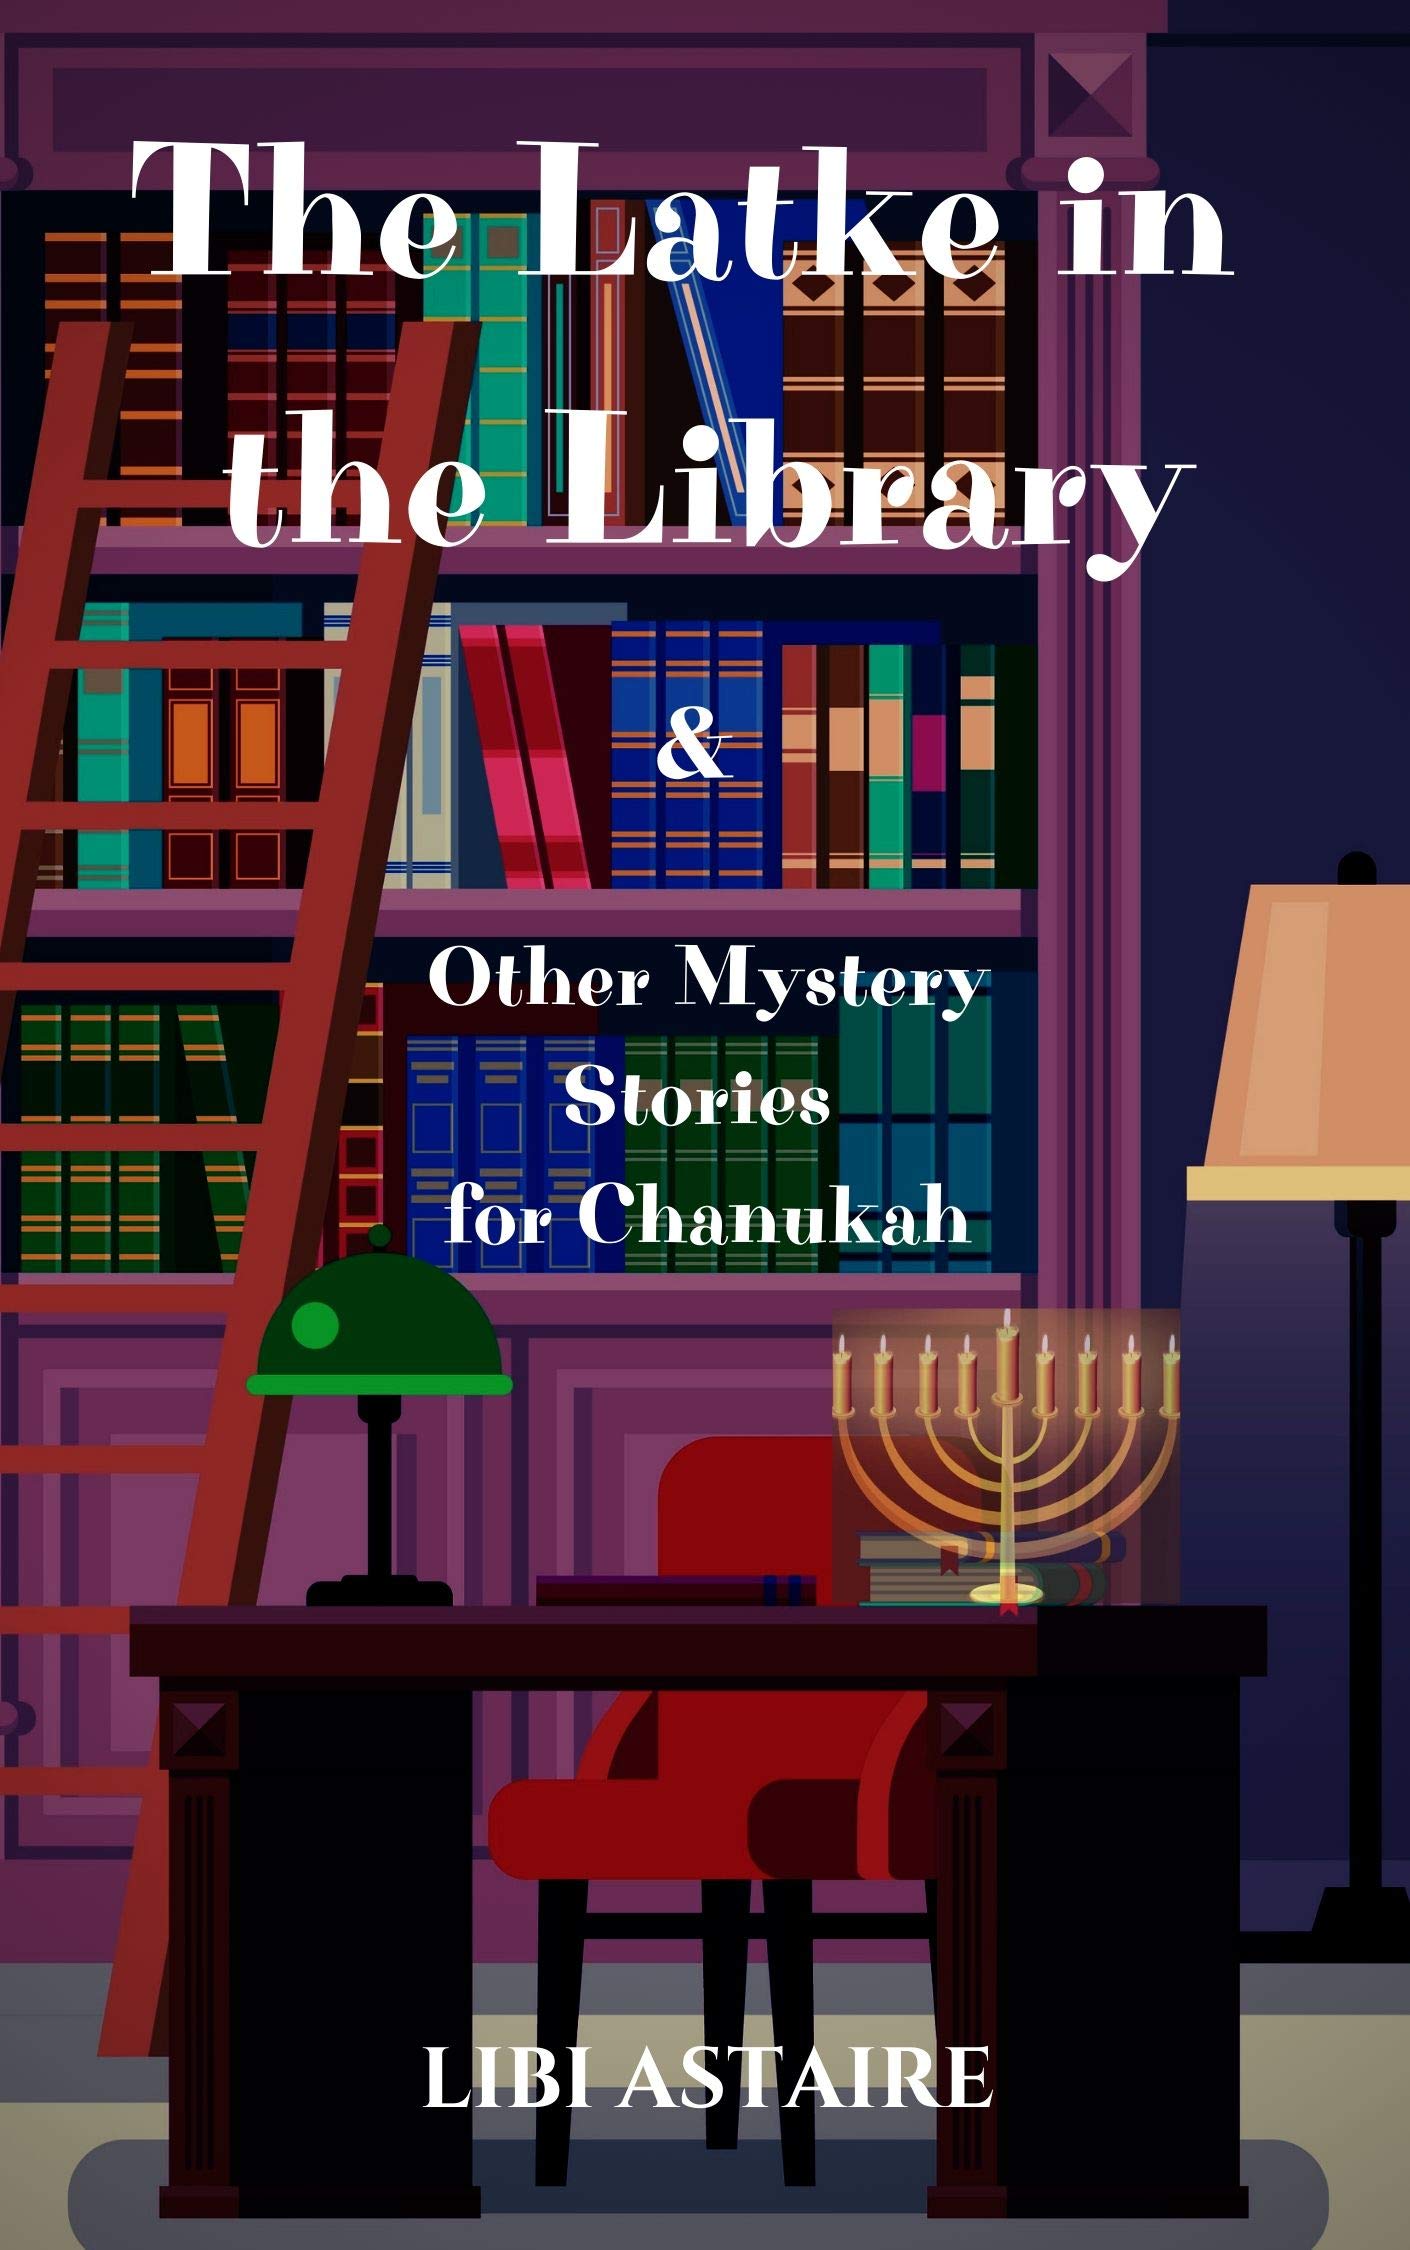 The Latke in the Library & Other Mystery Stories for Chanukah